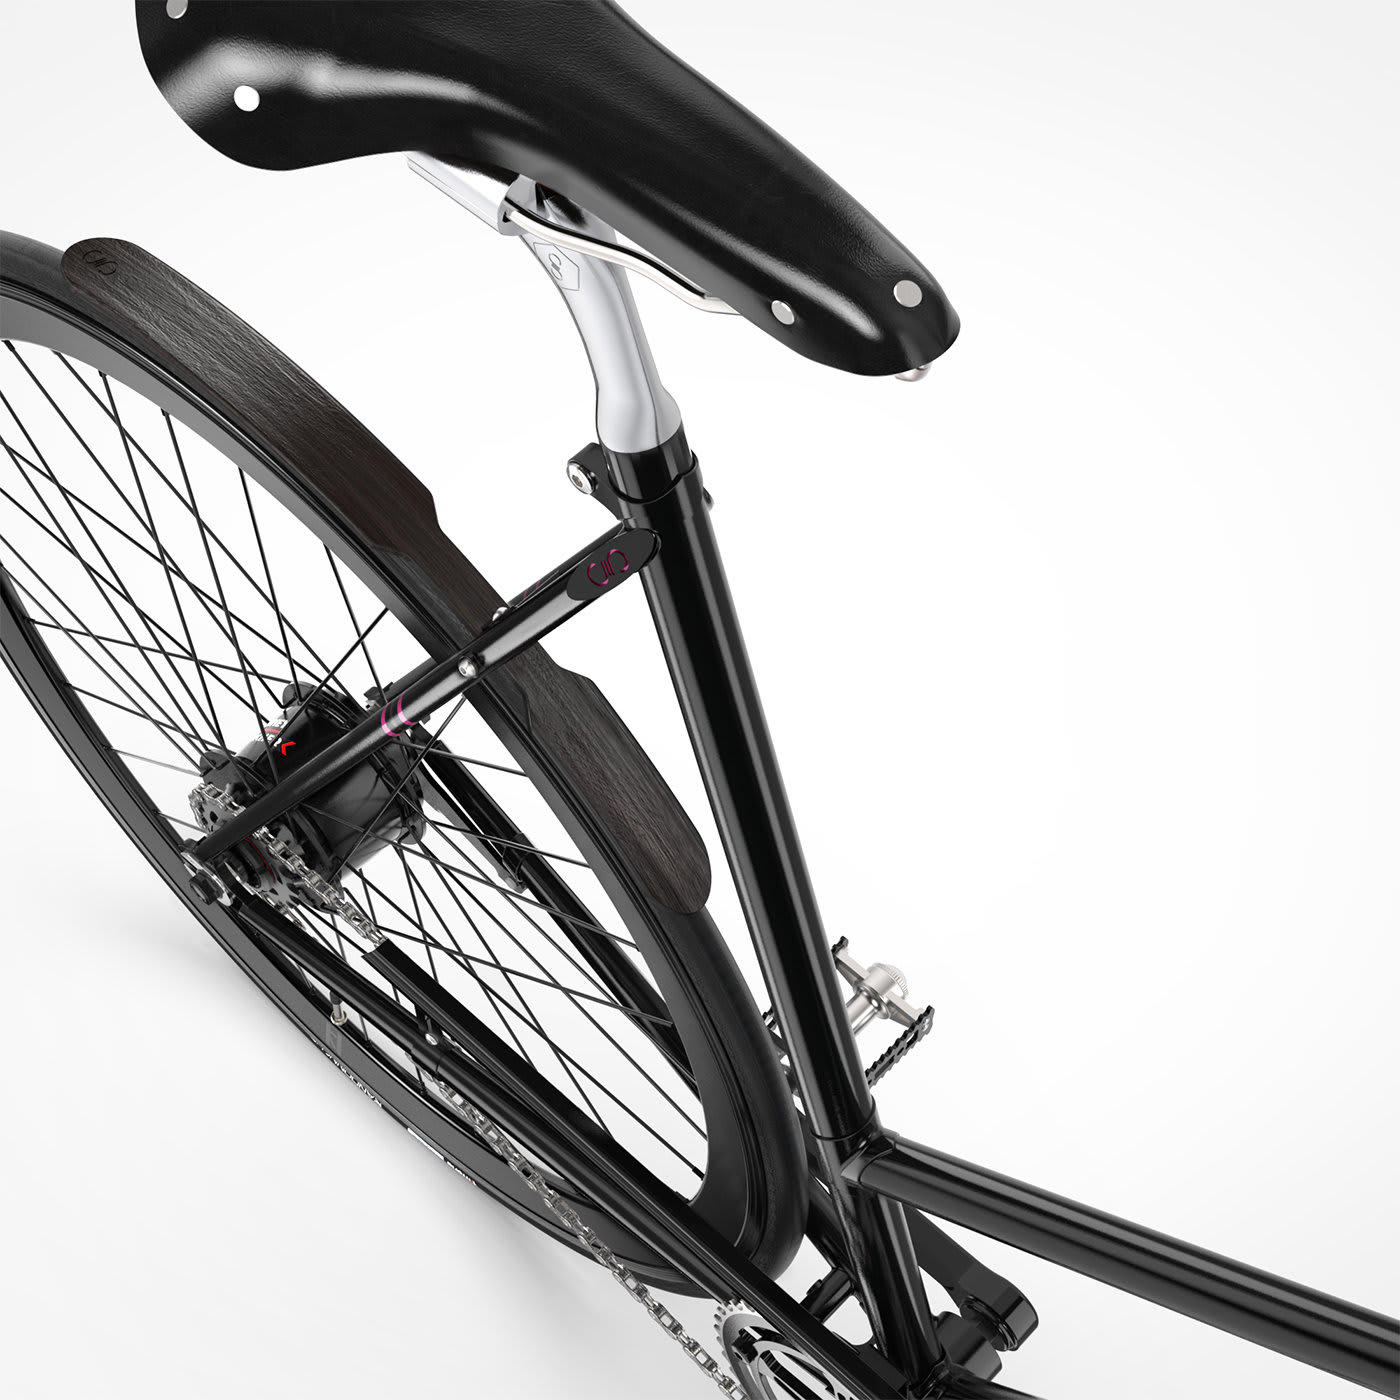 Rocket Gearbox Bicycle - Scatto Italiano